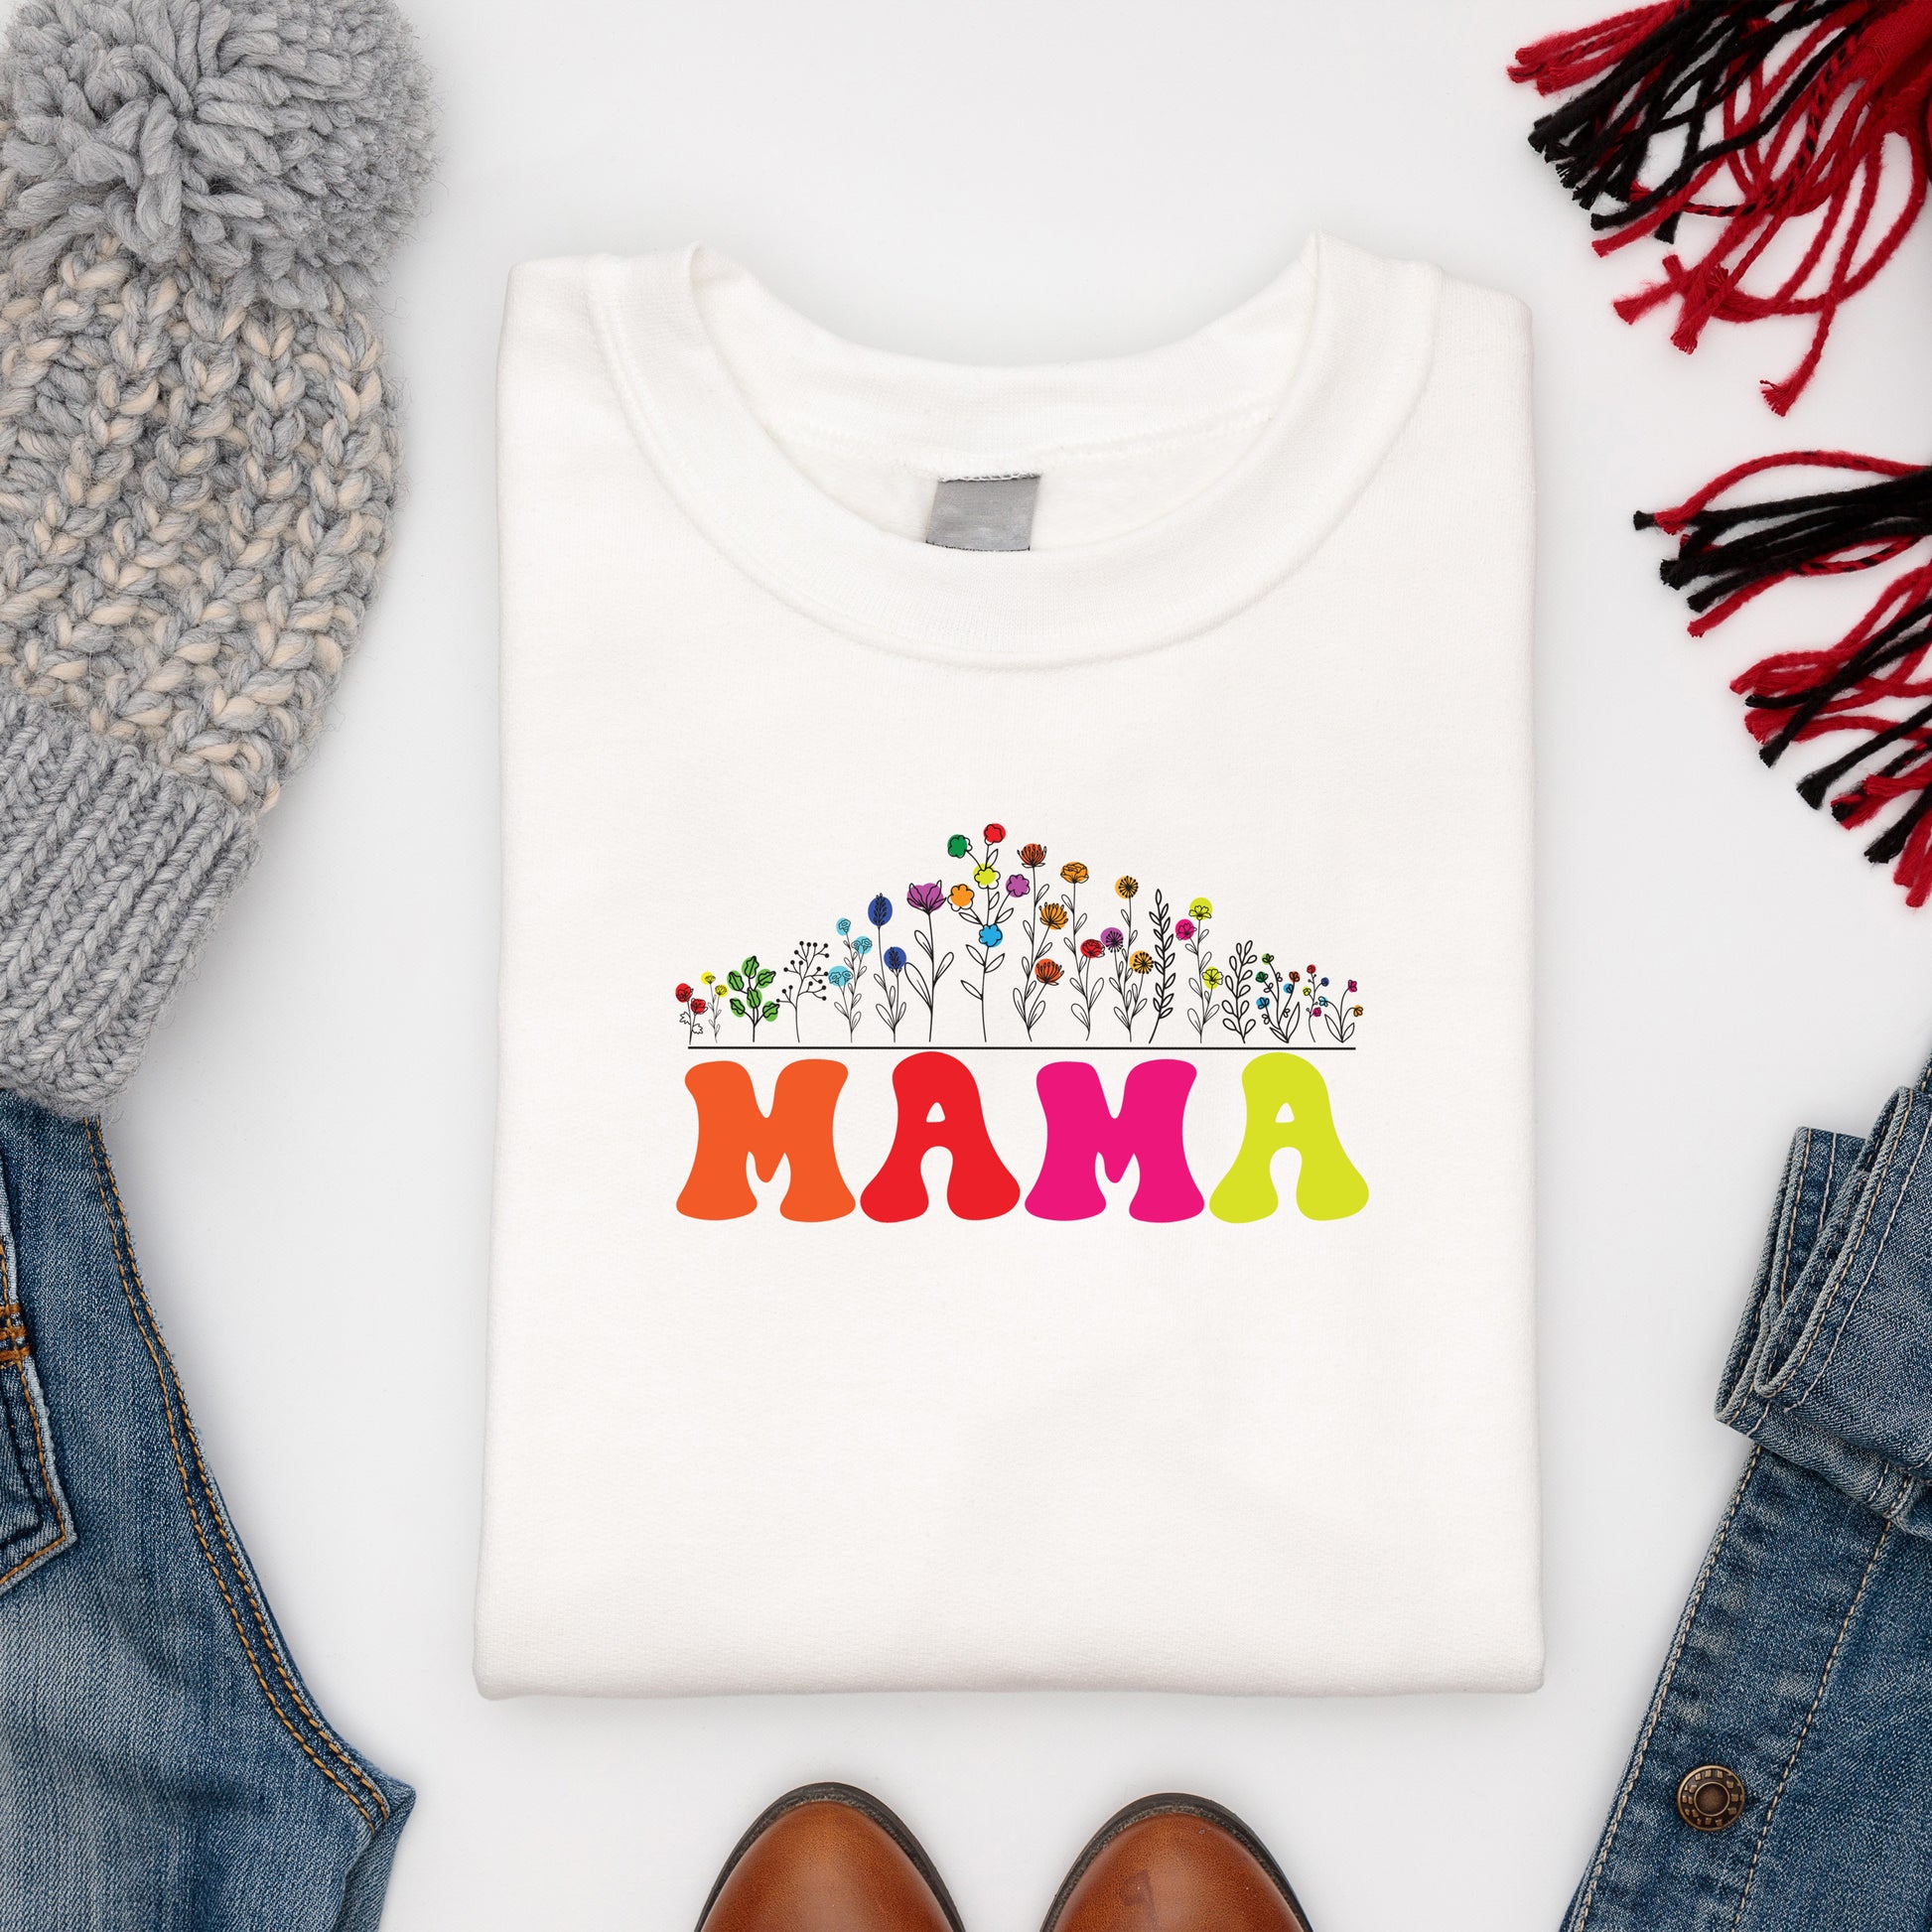 Super soft white sweatshirt with Mama print paired with winter woollies